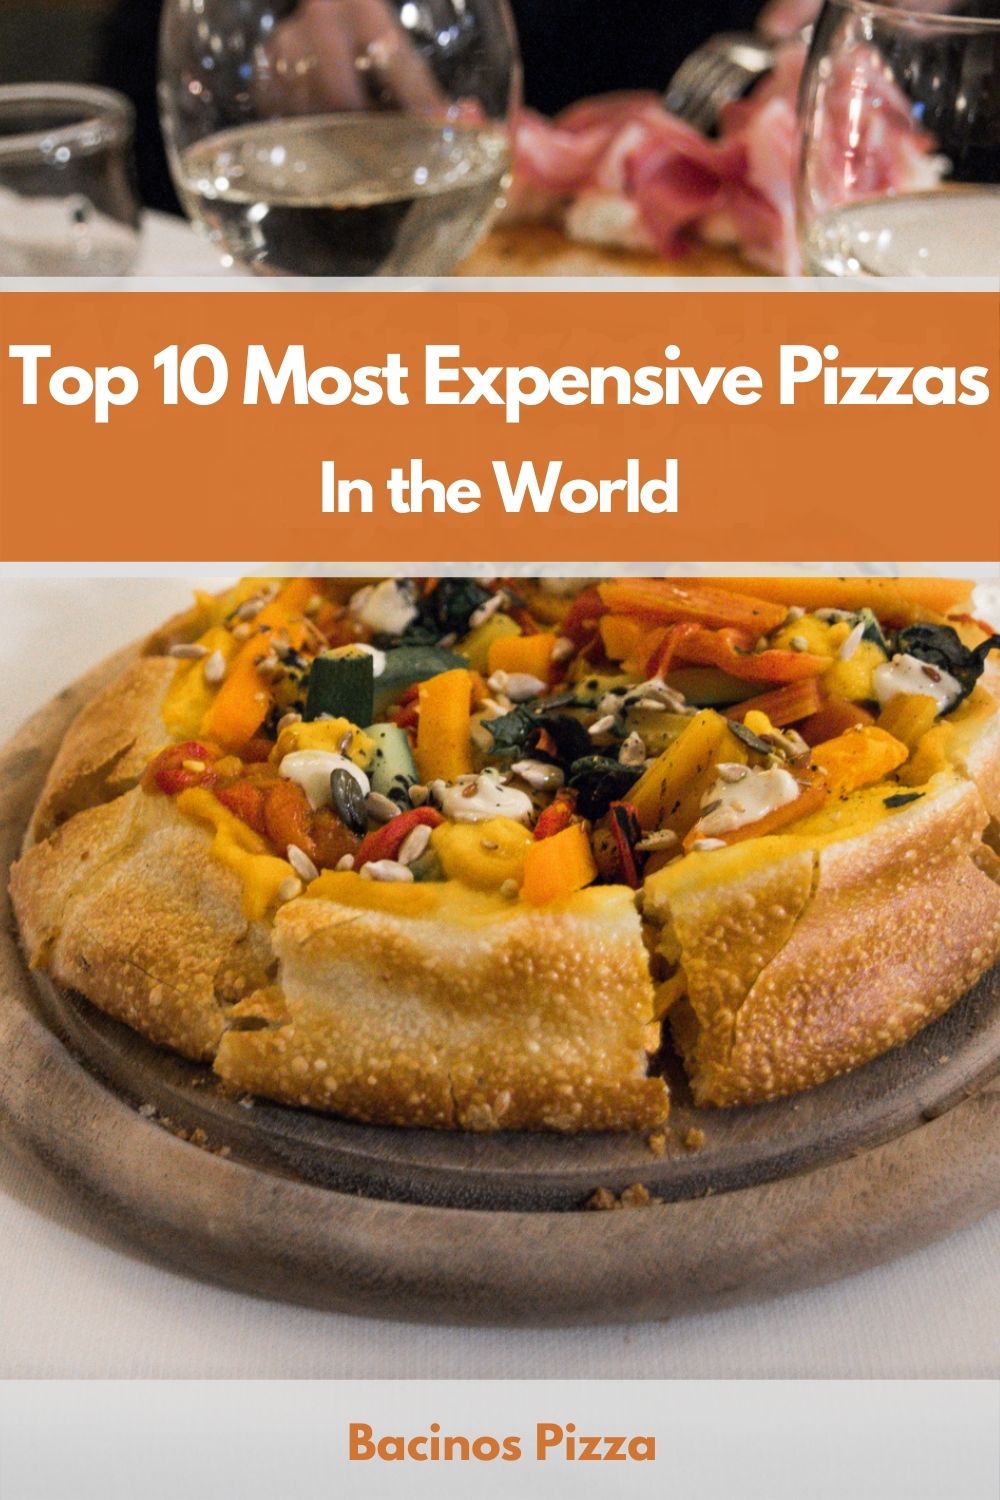 Top 10 Most Expensive Pizzas In the World pin